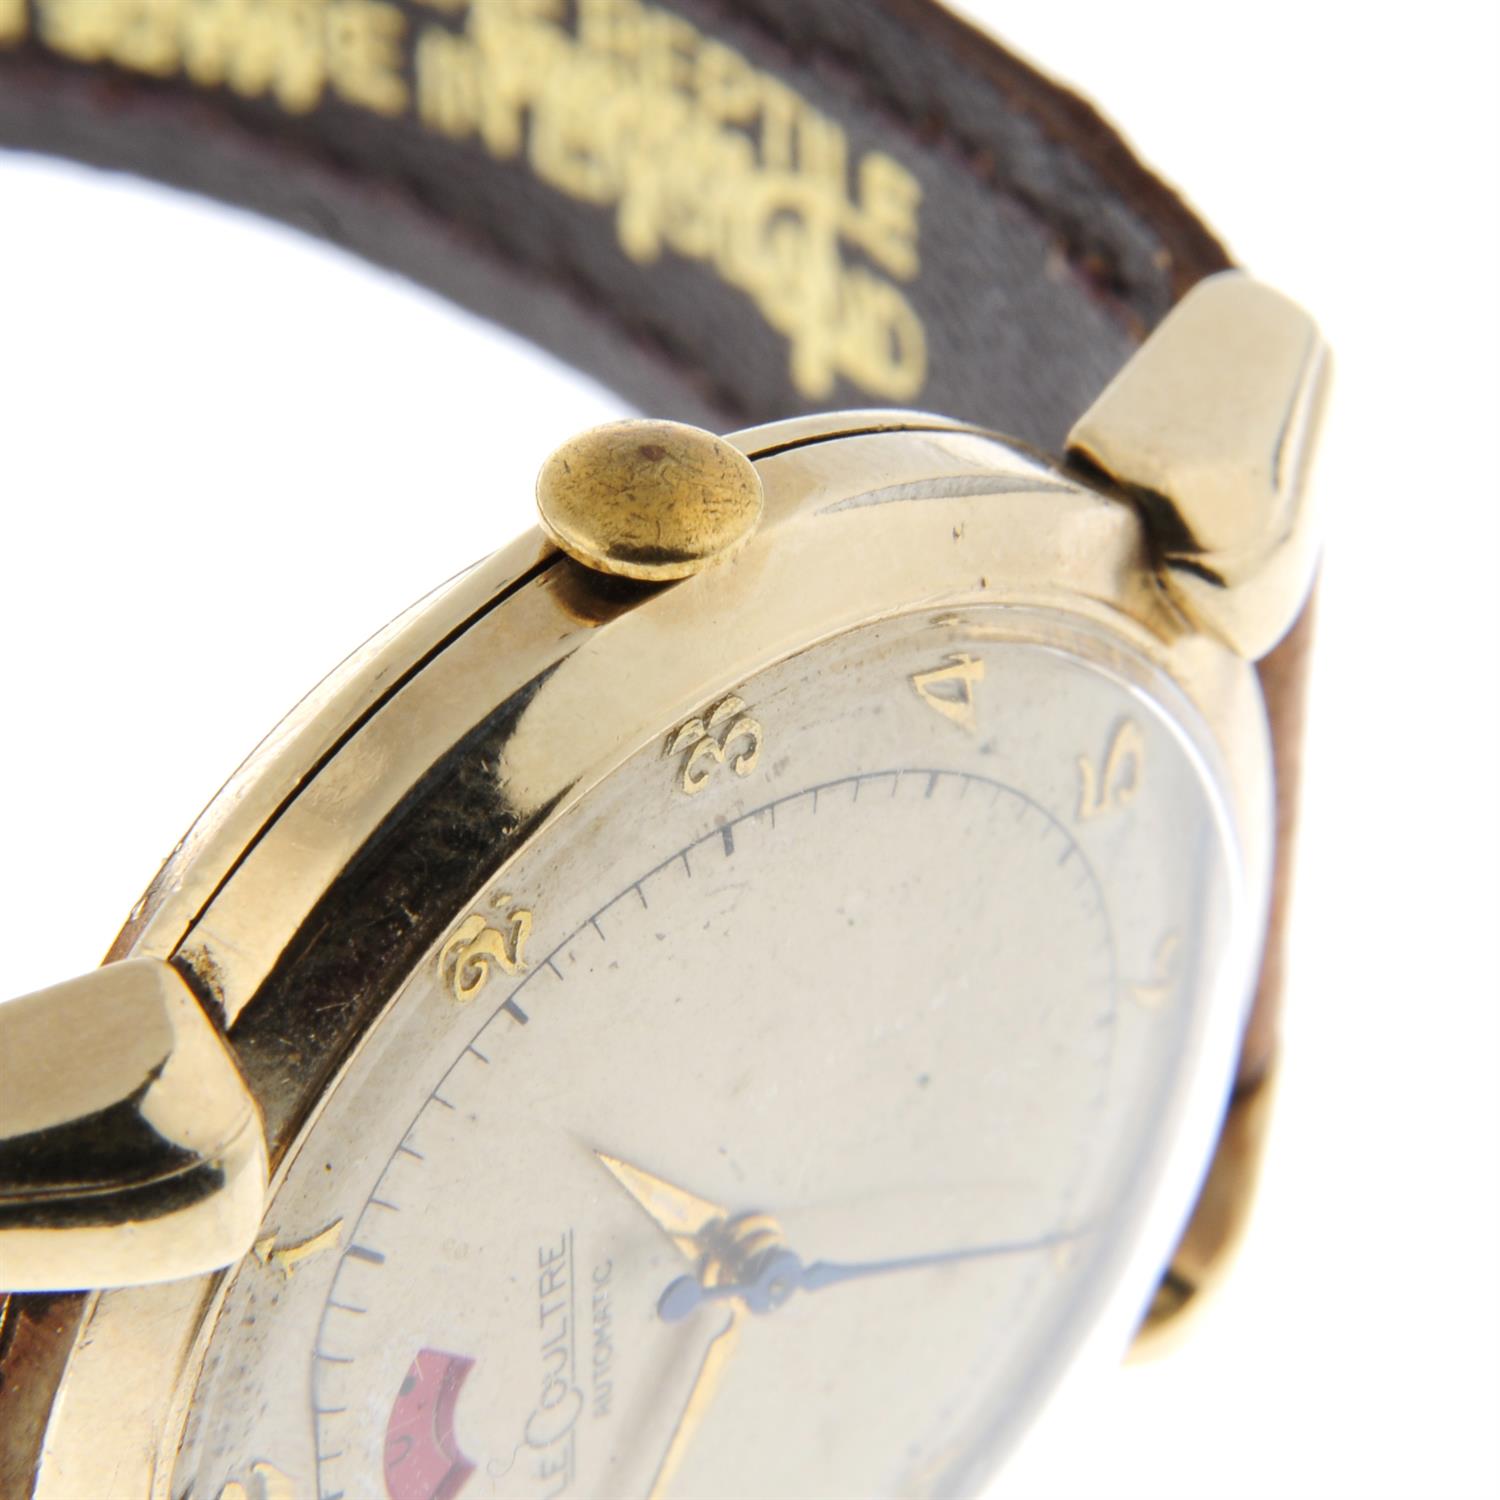 JAEGER-LECOULTRE - a gold filled Powermatic wrist watch, 33mm. - Image 4 of 5